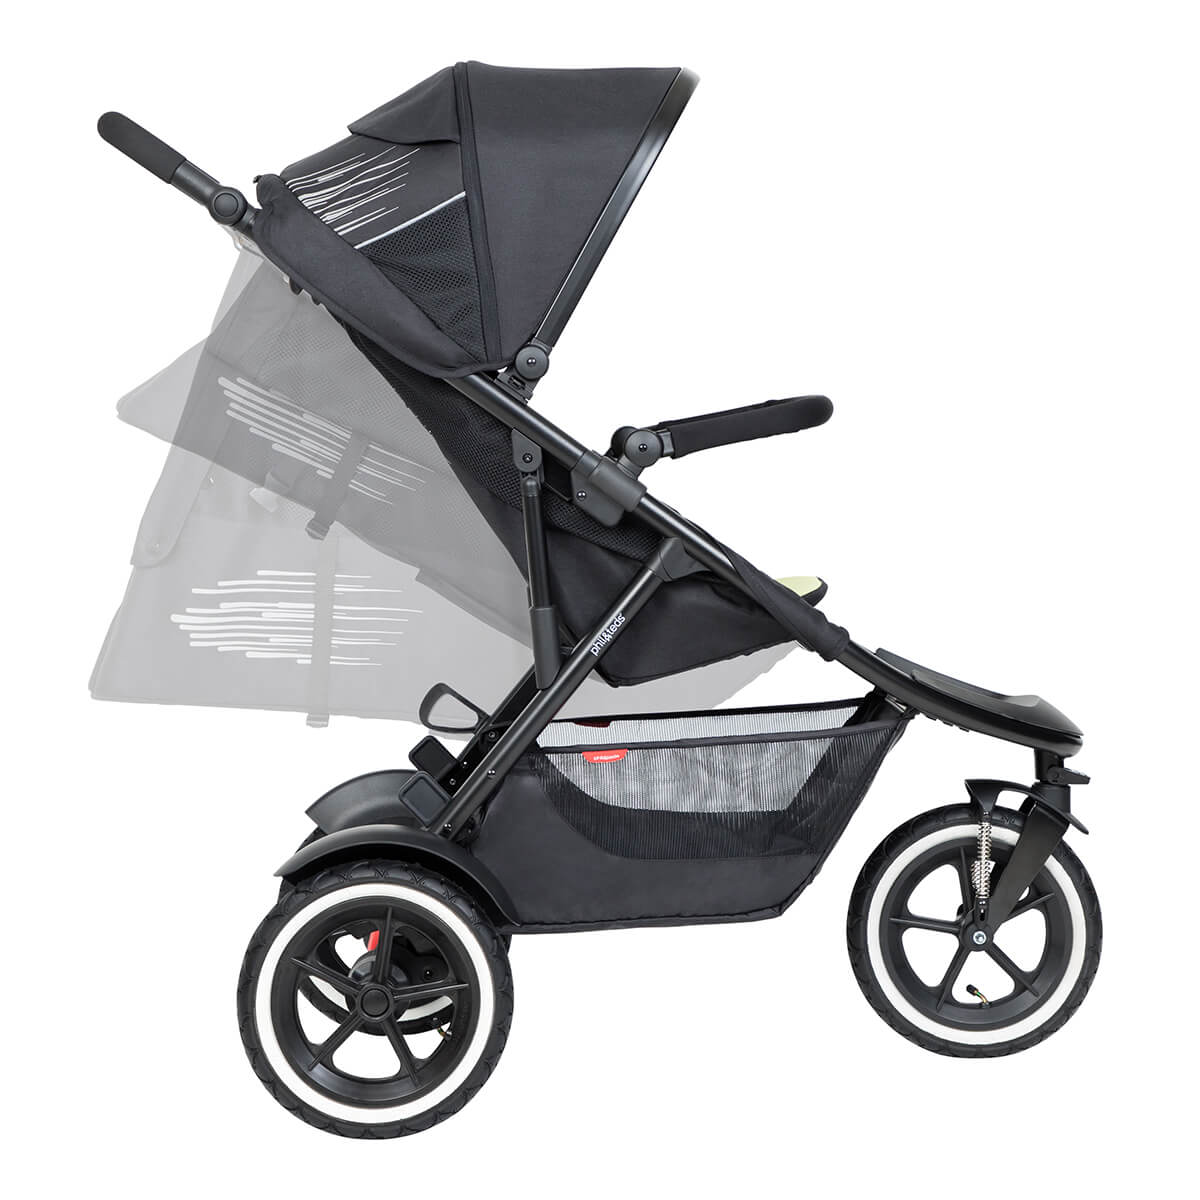 https://cdn.accentuate.io/4546157183081/19119322628201/philteds-sport-buggy-can-recline-in-multiple-angles-including-full-recline-for-newborn-baby-v1626484892260.jpg?1200x1200